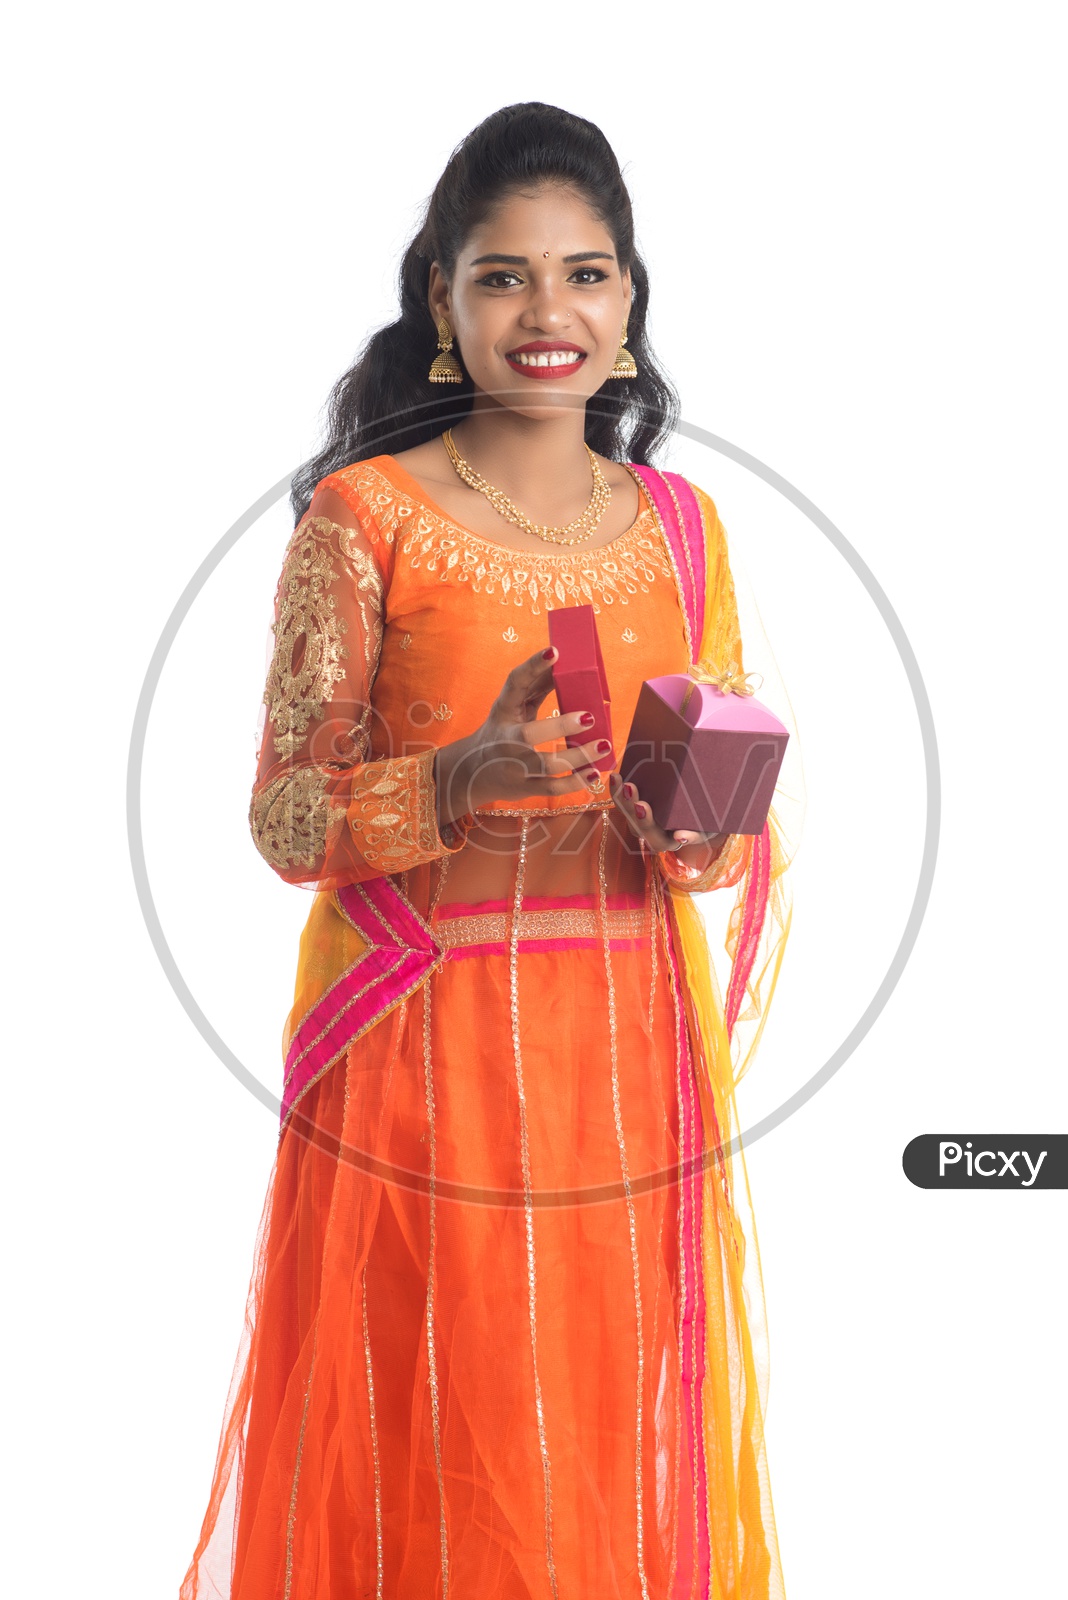 Young Traditional Indian Woman Holding Gift Boxes or Festival Gift Boxes  In hand With a Smile Face On an Isolated White Background